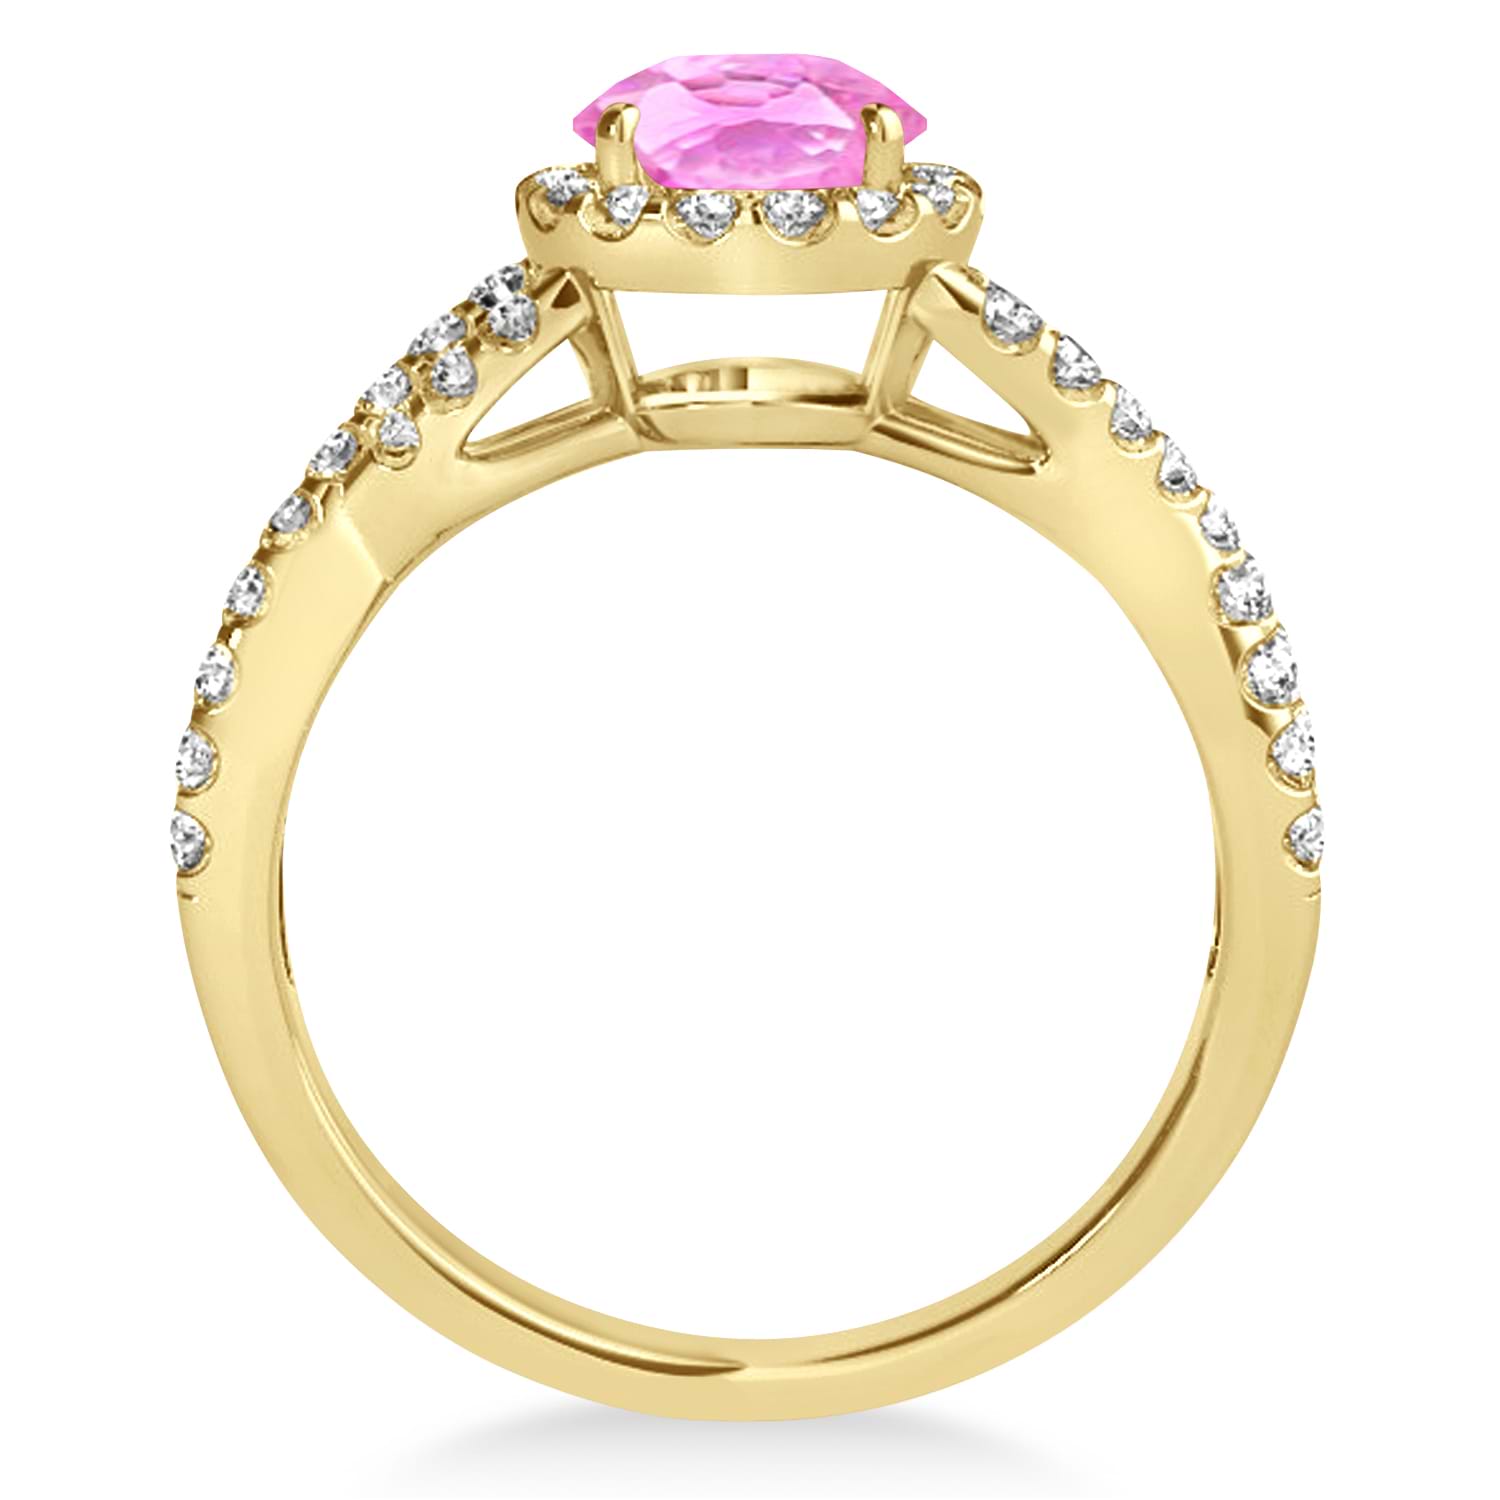 Pink Sapphire & Diamond Twisted Engagement Ring 14k Yellow Gold 1.55ct